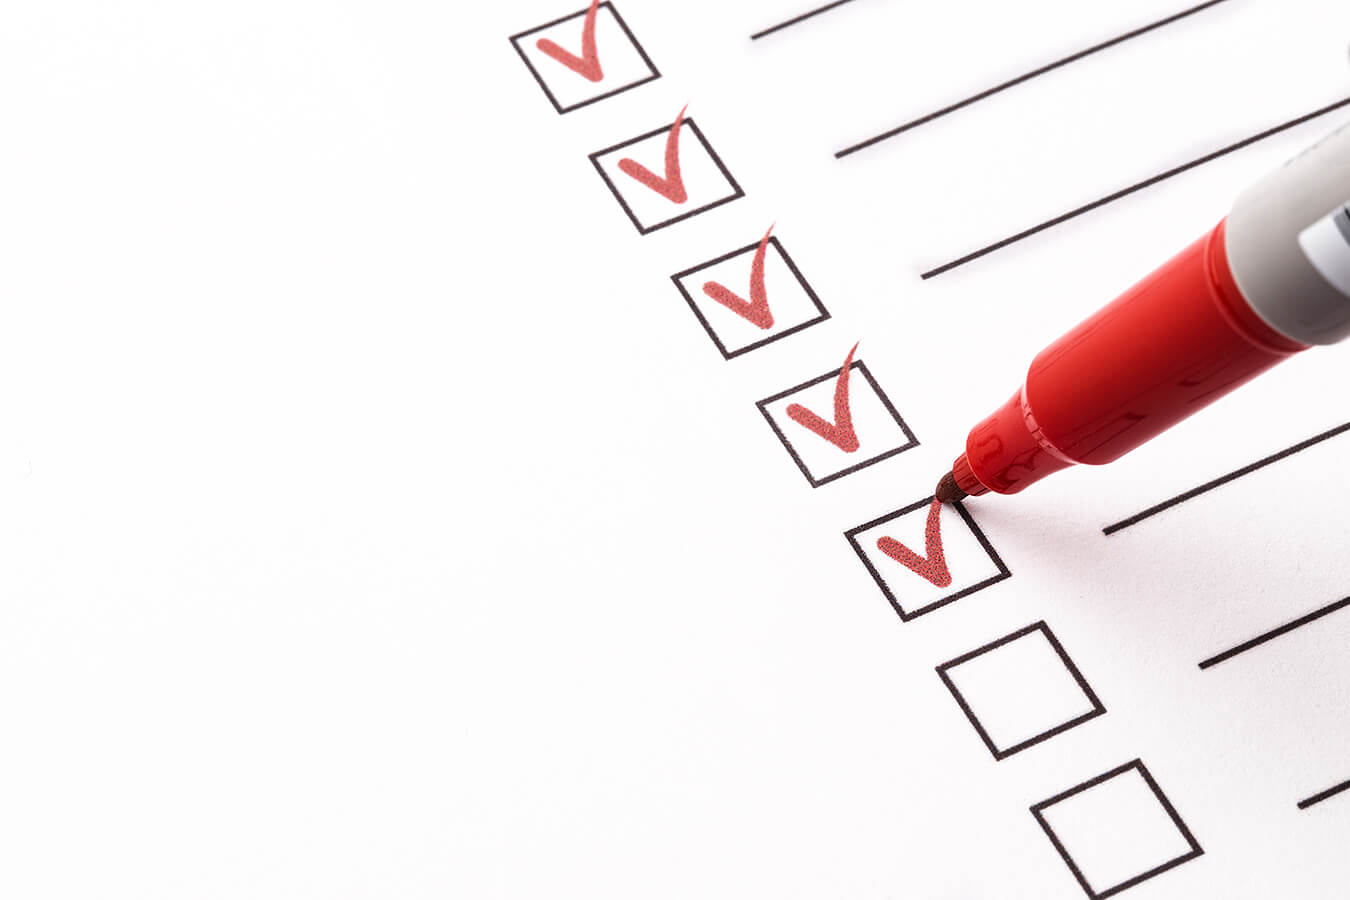 Checklist for improving client communications; checks marked in red ink